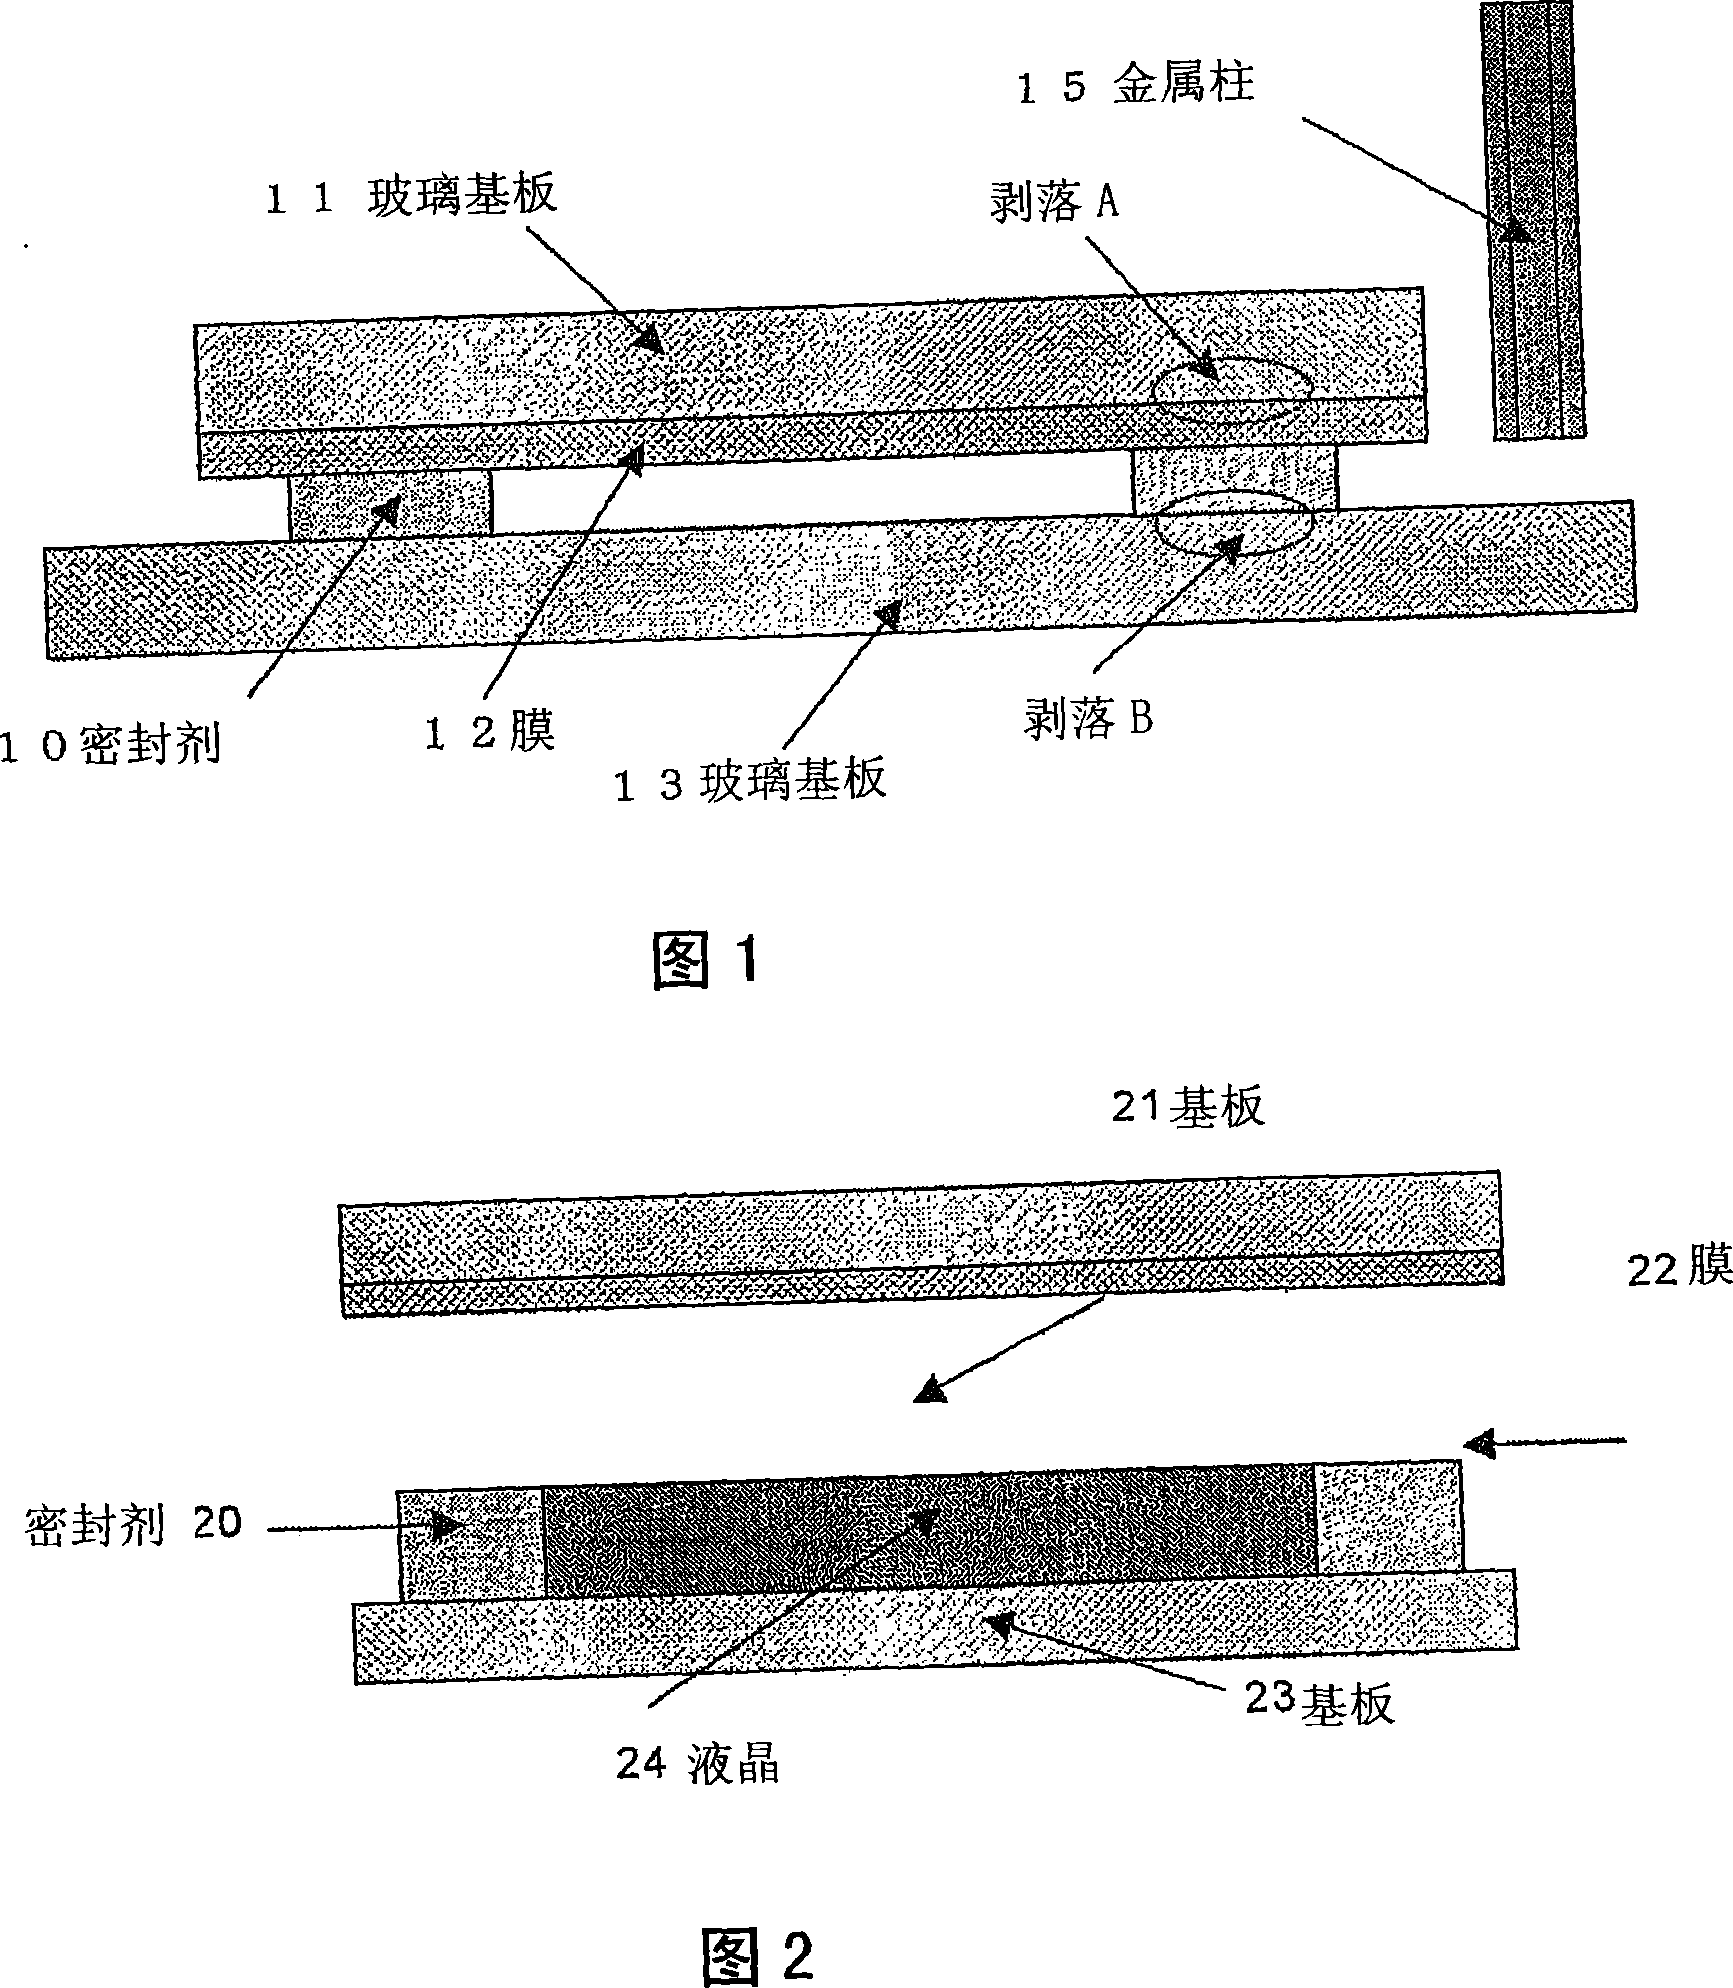 Sealing material for liquid crystal dropping method, vertically conducting material, and liquid crystal display element